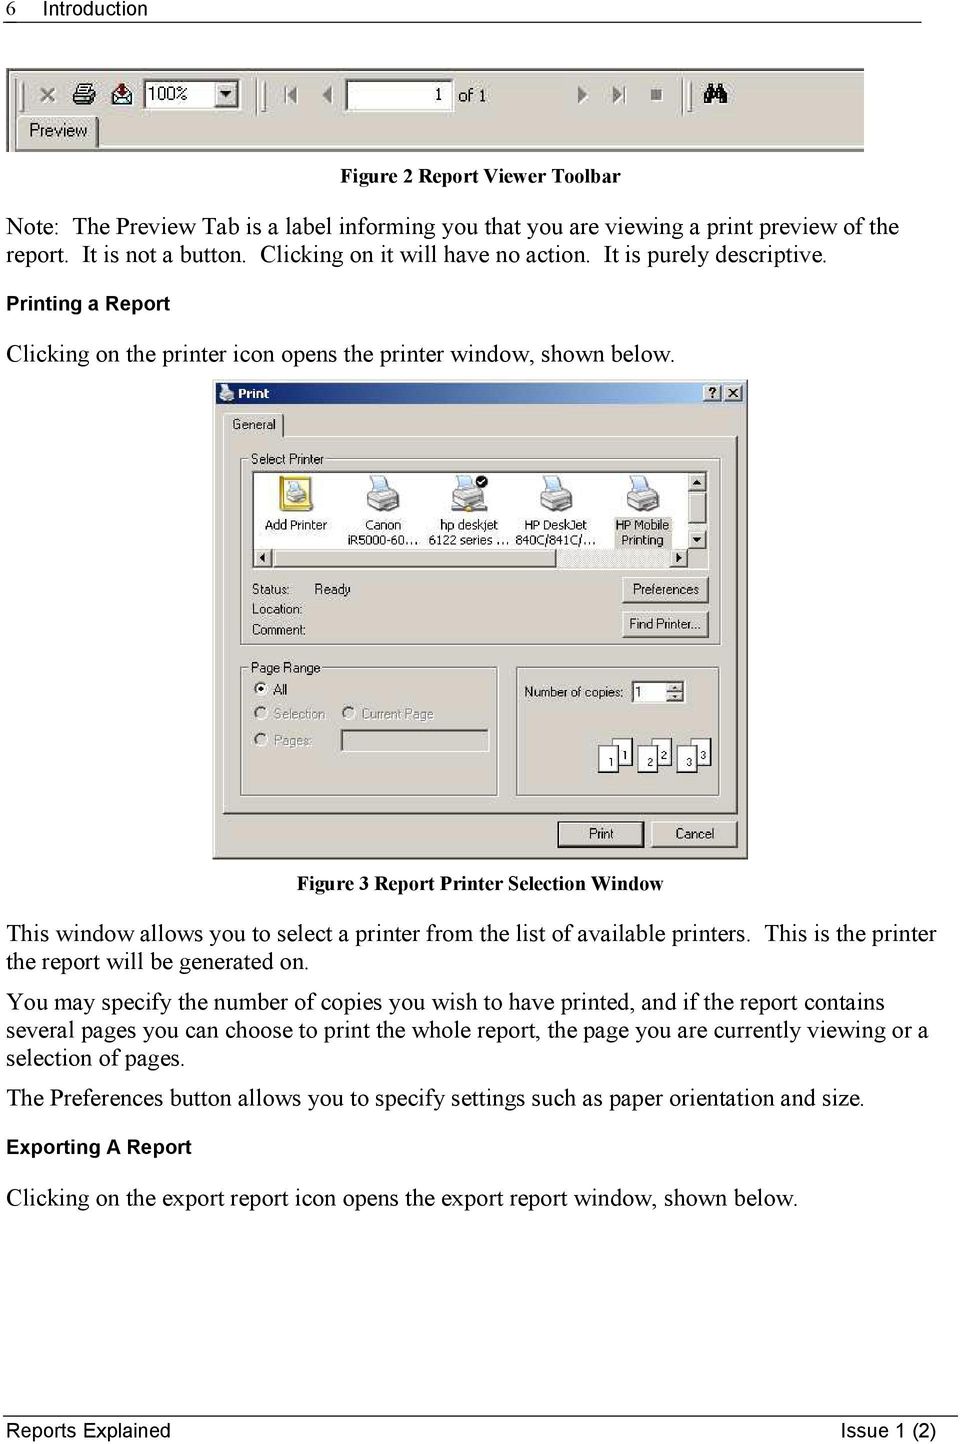 Figure 3 Report Printer Selection Window This window allows you to select a printer from the list of available printers. This is the printer the report will be generated on.